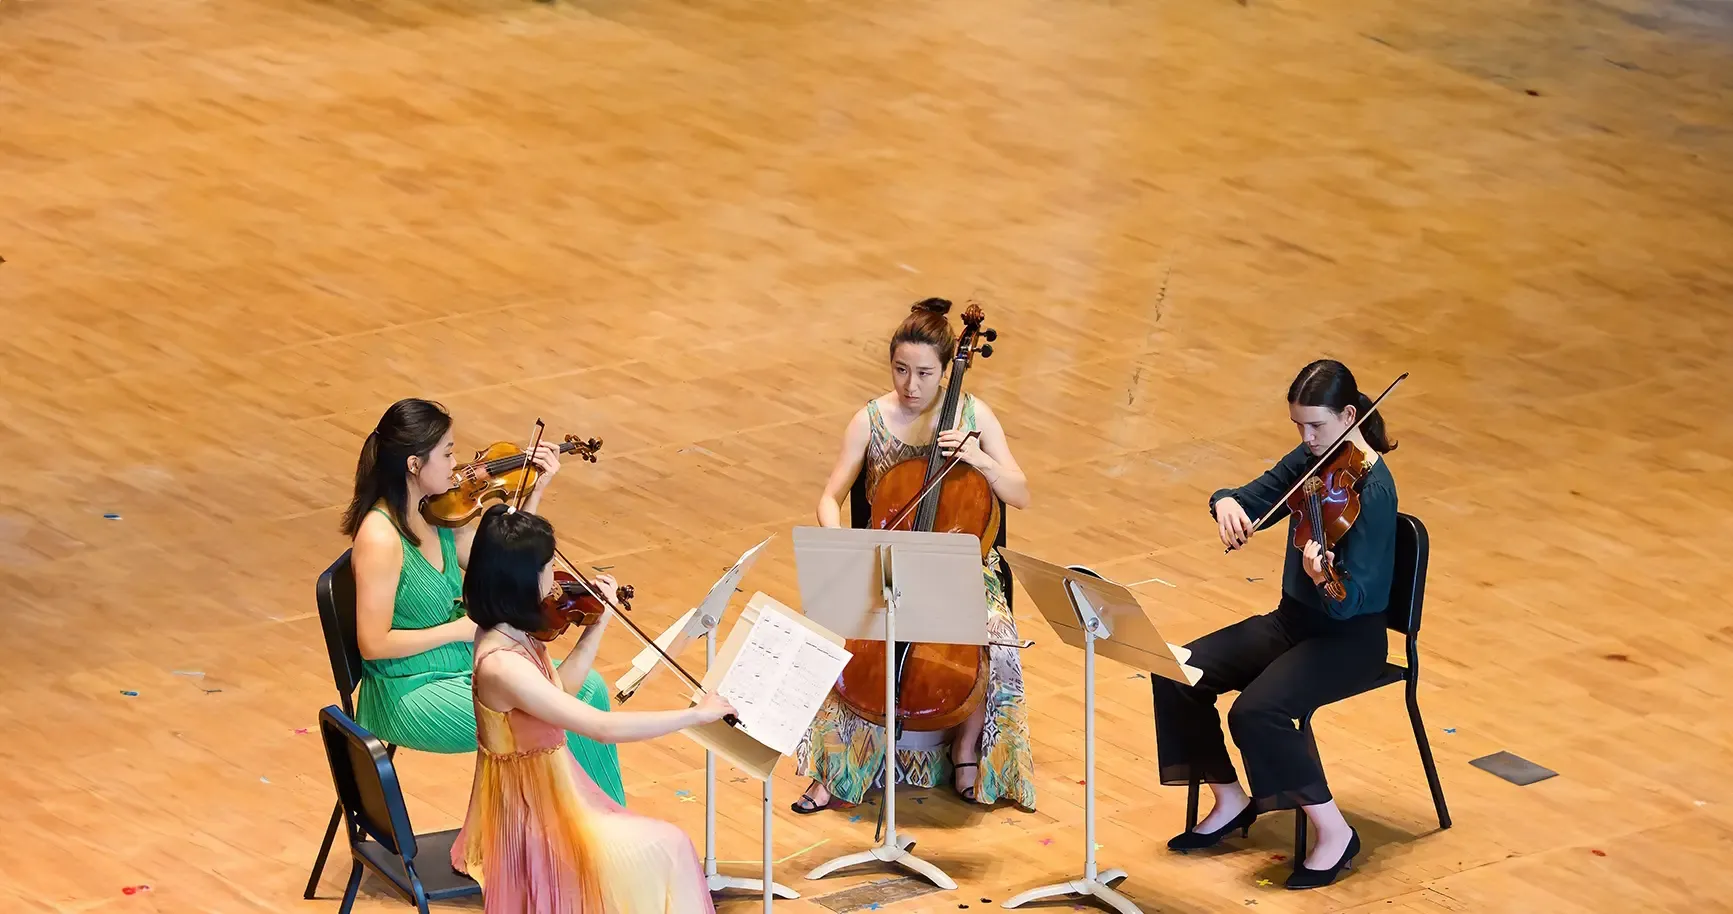 Four musicians performing in a string quartet setting on a wooden stage facing each other, two playing violins, one playing the cello, and one reading sheet music while playing the viola.